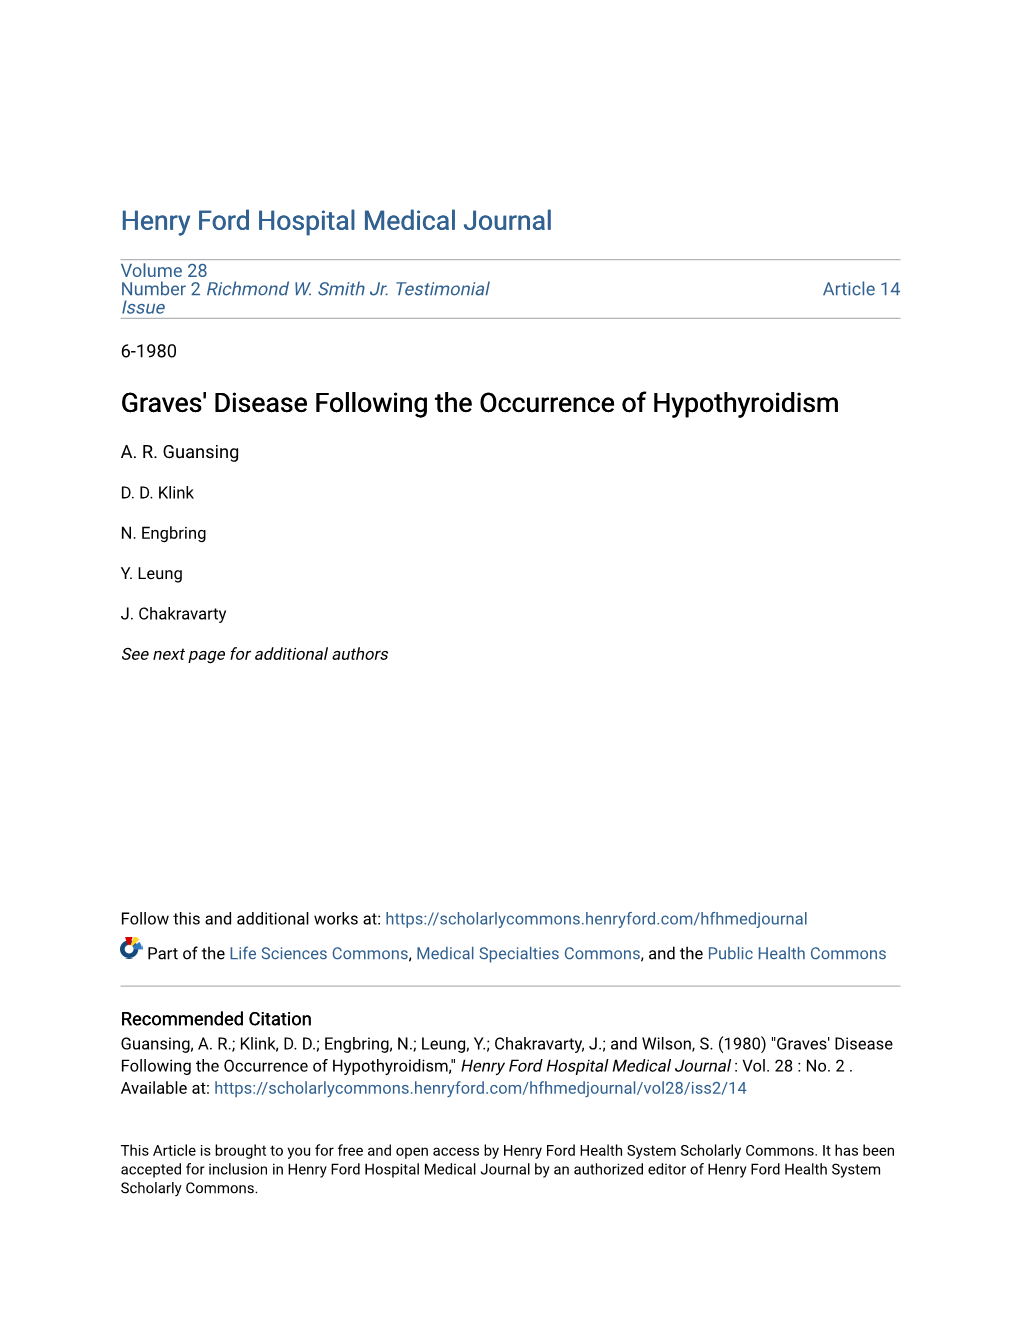 Graves' Disease Following the Occurrence of Hypothyroidism